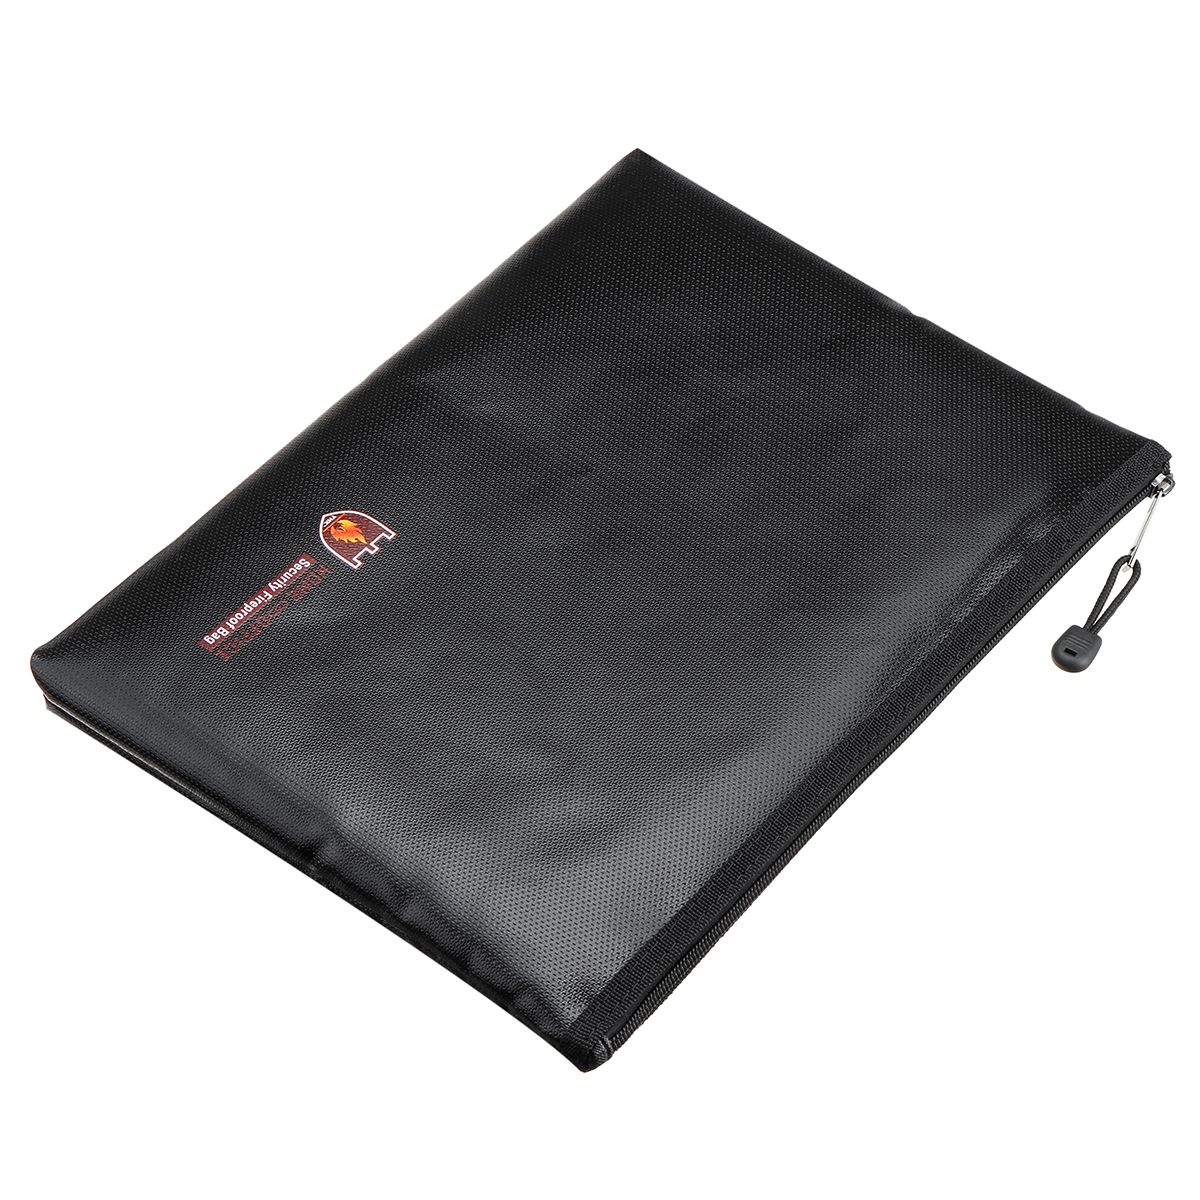 Find Portable Fireproof Waterproof Document Envelope File Folder Cash Pouch Fireproof Money Bag Lipo Safe Bag for Home Office S/M/L for Sale on Gipsybee.com with cryptocurrencies